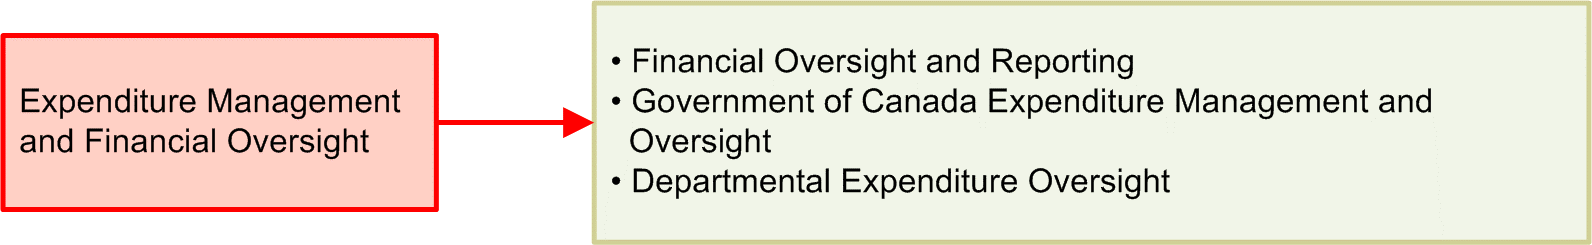 Expenditure Management and Financial Oversight